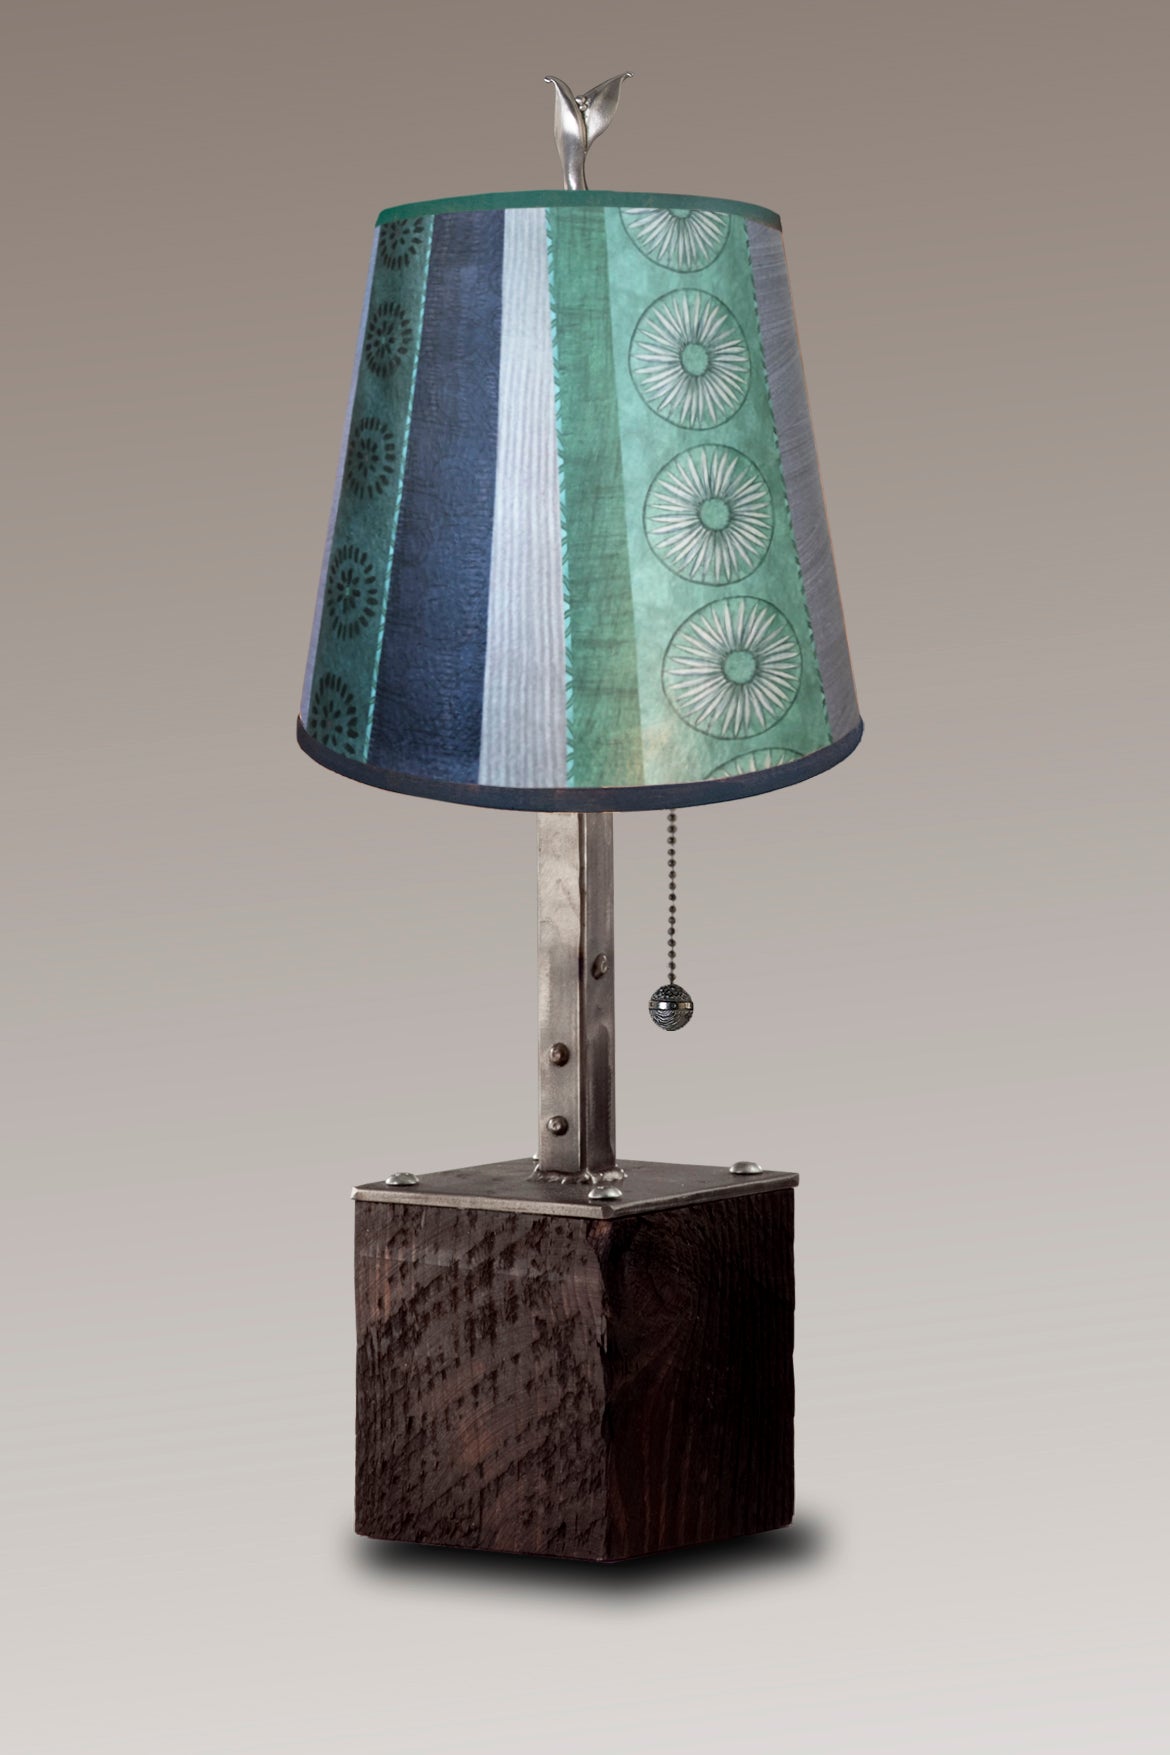 Janna Ugone &amp; Co Table Lamps Steel Table Lamp on Reclaimed Wood with Small Drum Shade in Serape Waters